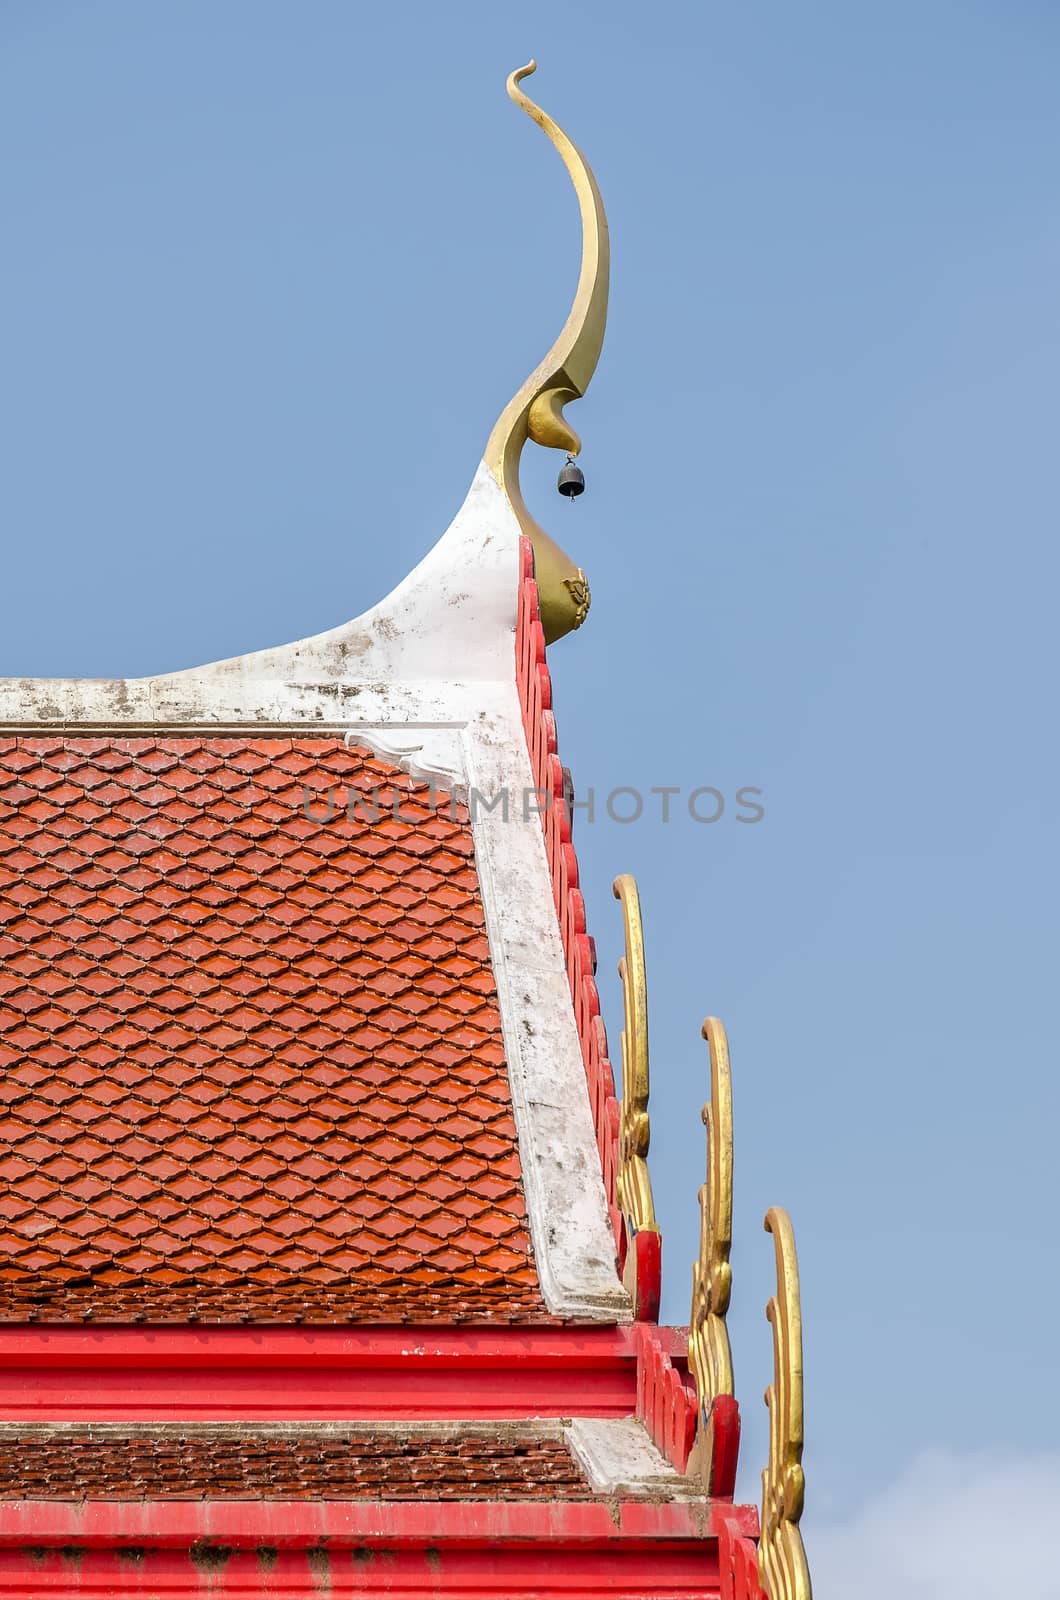 Roof style of thai temple with gable apex on the top